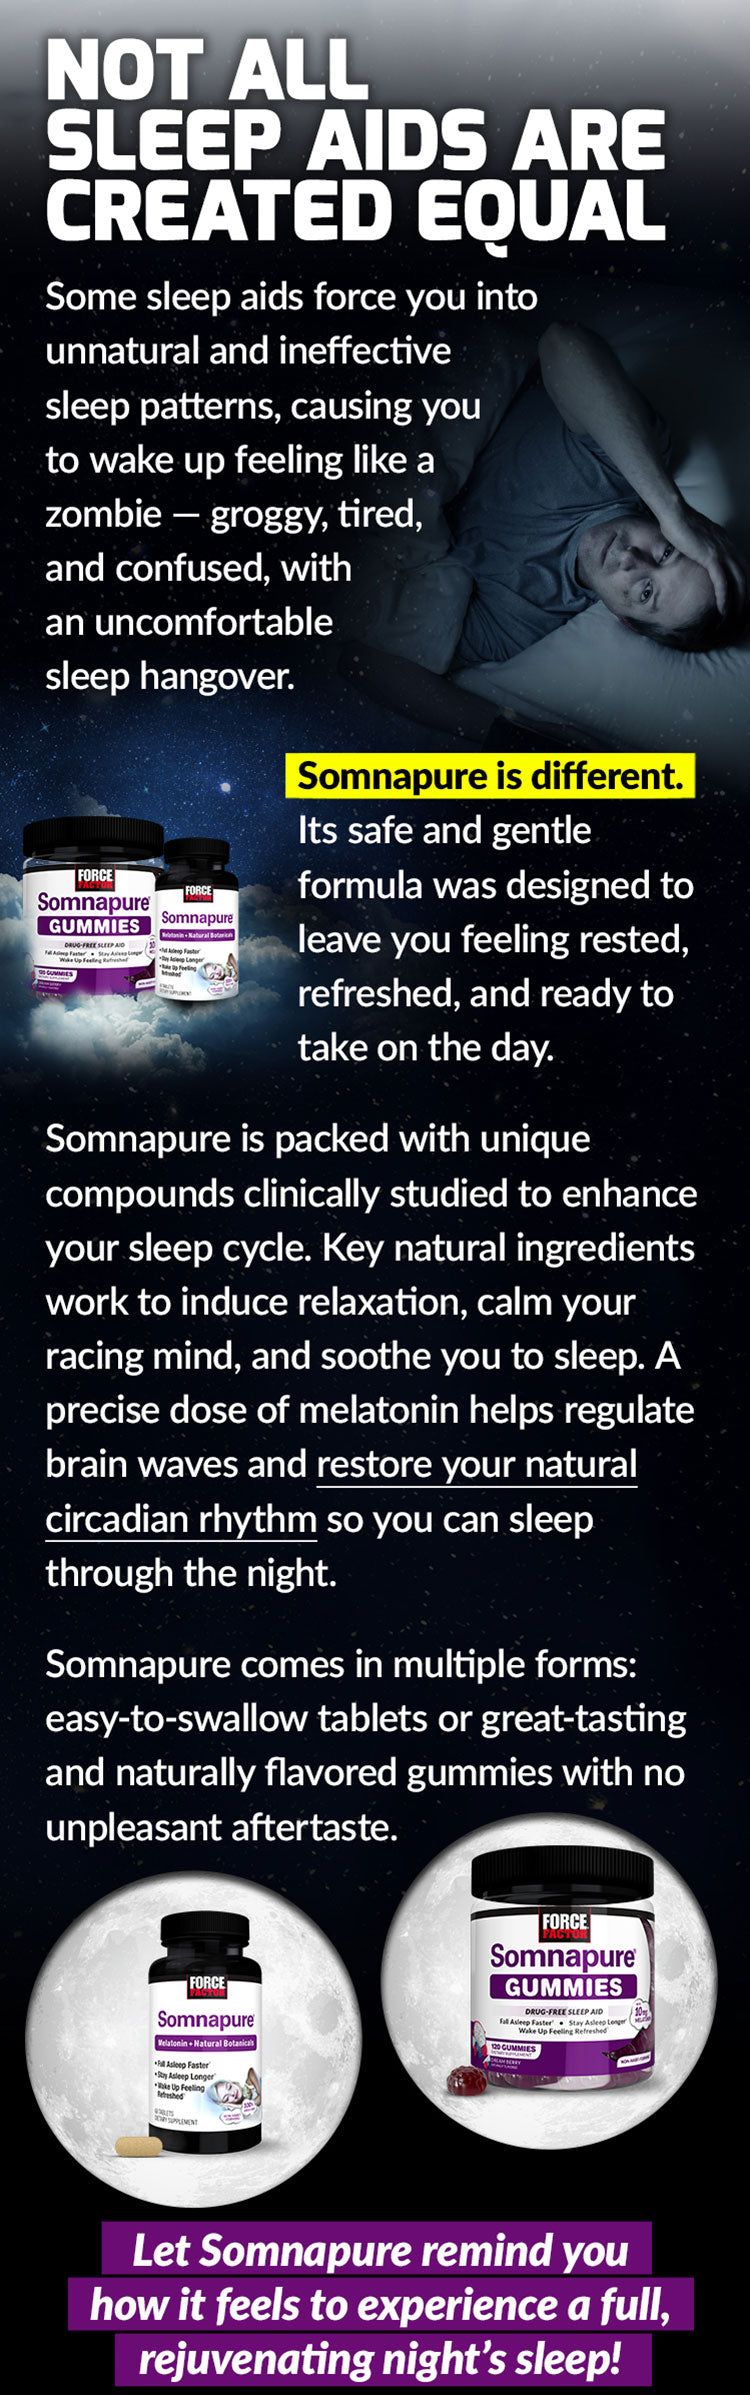 NOT ALL SLEEP AIDS ARE CREATED EQUAL. Some sleep aids force you into unnatural and ineffective sleep patterns, causing you to wake up feeling like a zombie – groggy, tired, and confused, with an uncomfortable sleep hangover. Somnapure is different. Its safe and gentle formula was designed to leave you feeling rested, refreshed, and ready to take on the day. Somnapure is packed full of unique compounds clinically studied to enhance your sleep cycle. Key natural ingredients work to induce relaxation, calm your racing mind, and soothe you to sleep. A precise dose of melatonin helps regulate brain waves and restore your natural circadian rhythm so you can sleep through the night. Somnapure comes in multiple forms: easy-to-swallow tablets or great-tasting and naturally flavored gummies with no unpleasant aftertaste. Let Somnapure remind you how it feels to experience a full, rejuvenating night’s sleep!